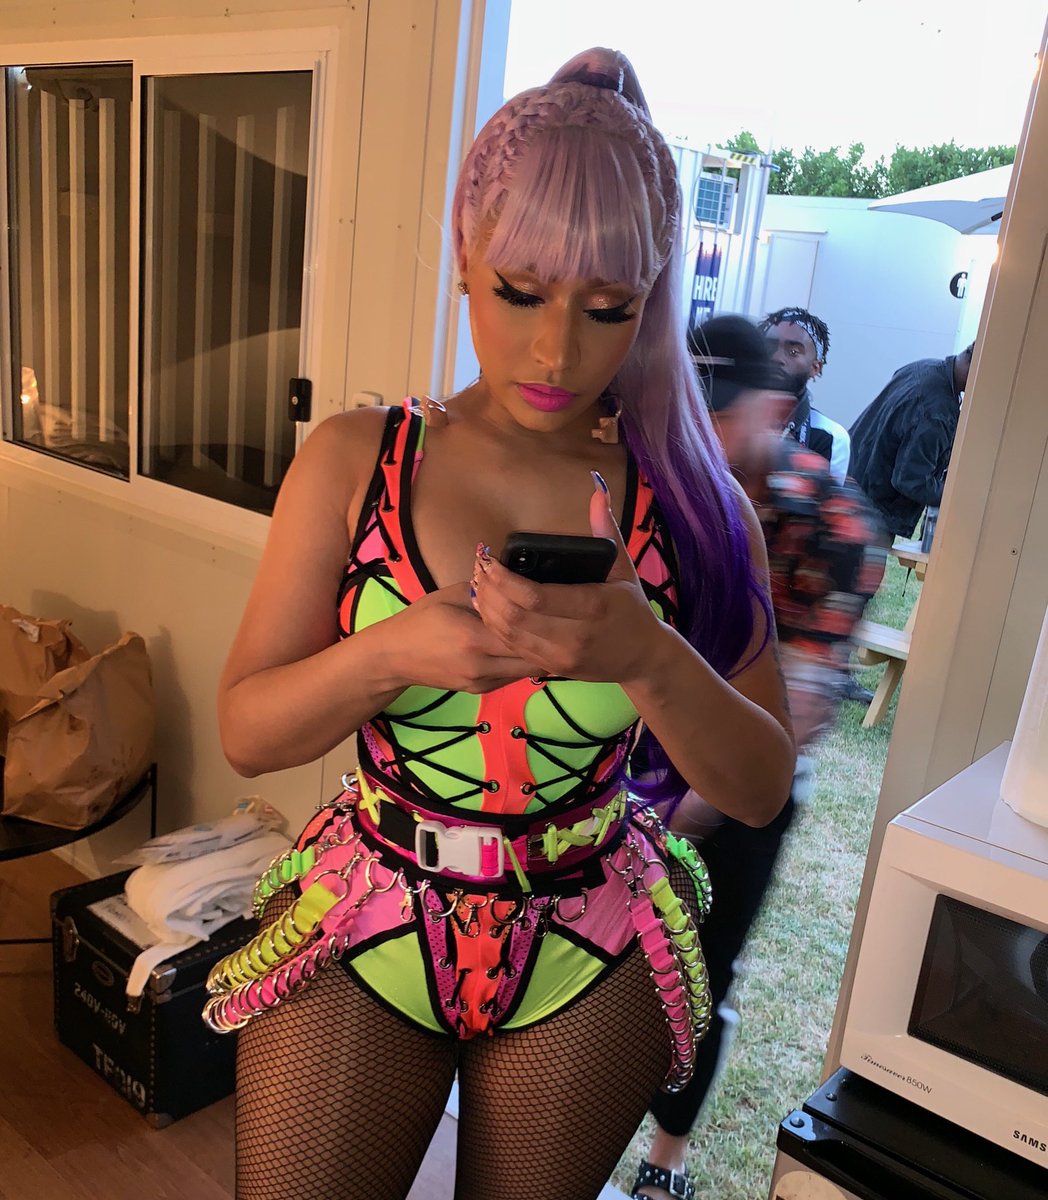 Oh y’all thought skinny legend left the chat for good barbz? Zont Zoo it ???? https://t.co/TKsjcdZUr1